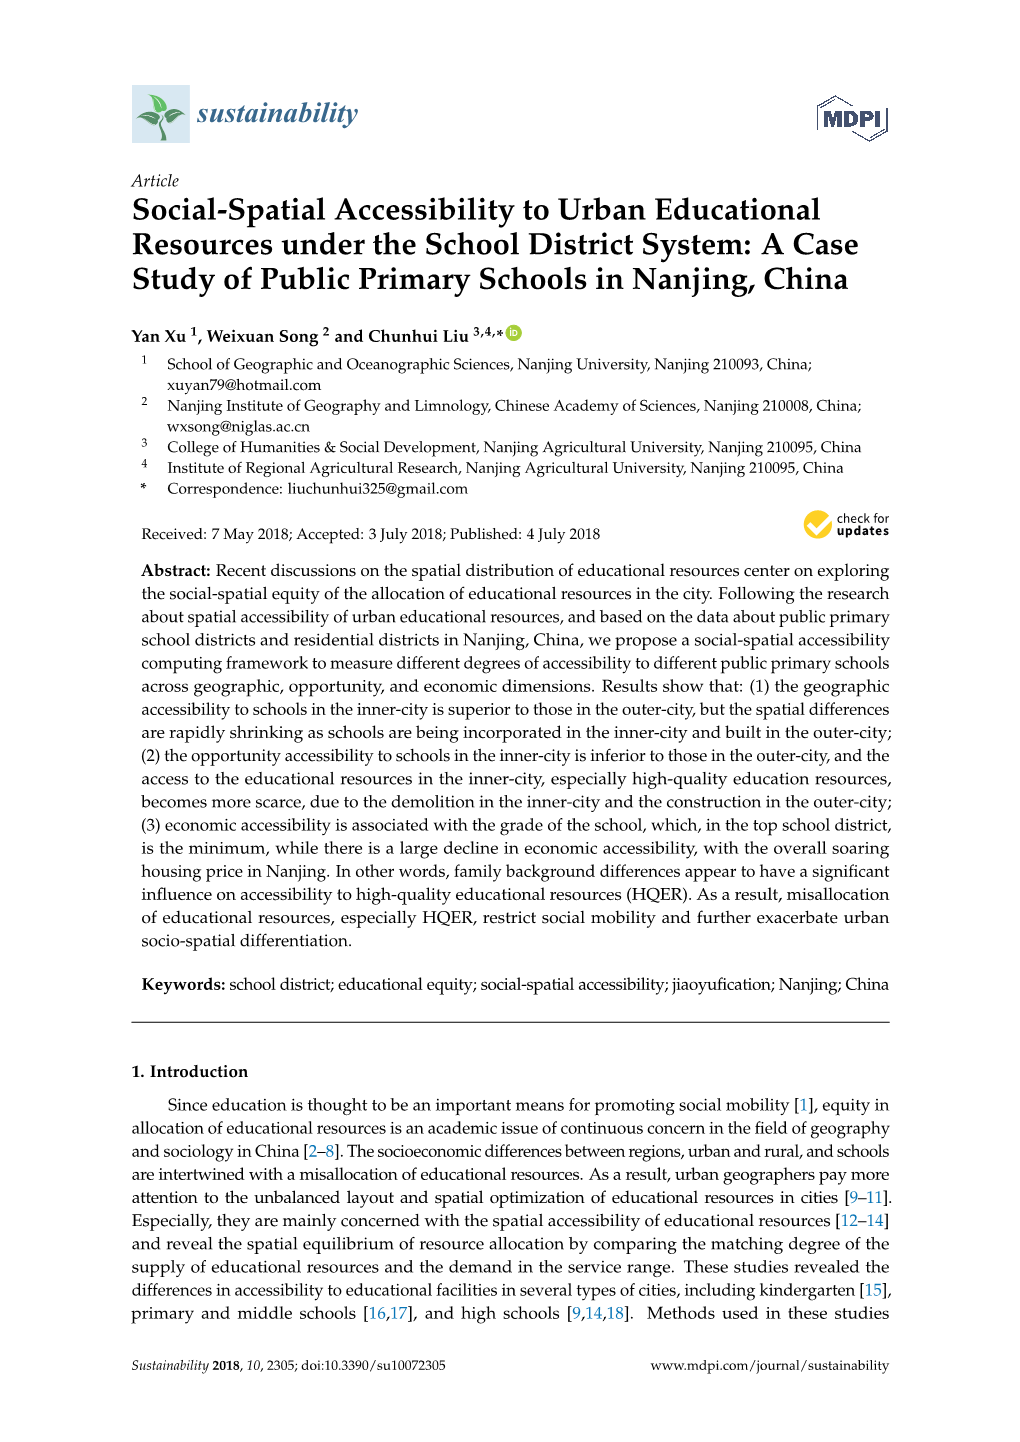 Social-Spatial Accessibility to Urban Educational Resources Under the School District System: a Case Study of Public Primary Schools in Nanjing, China